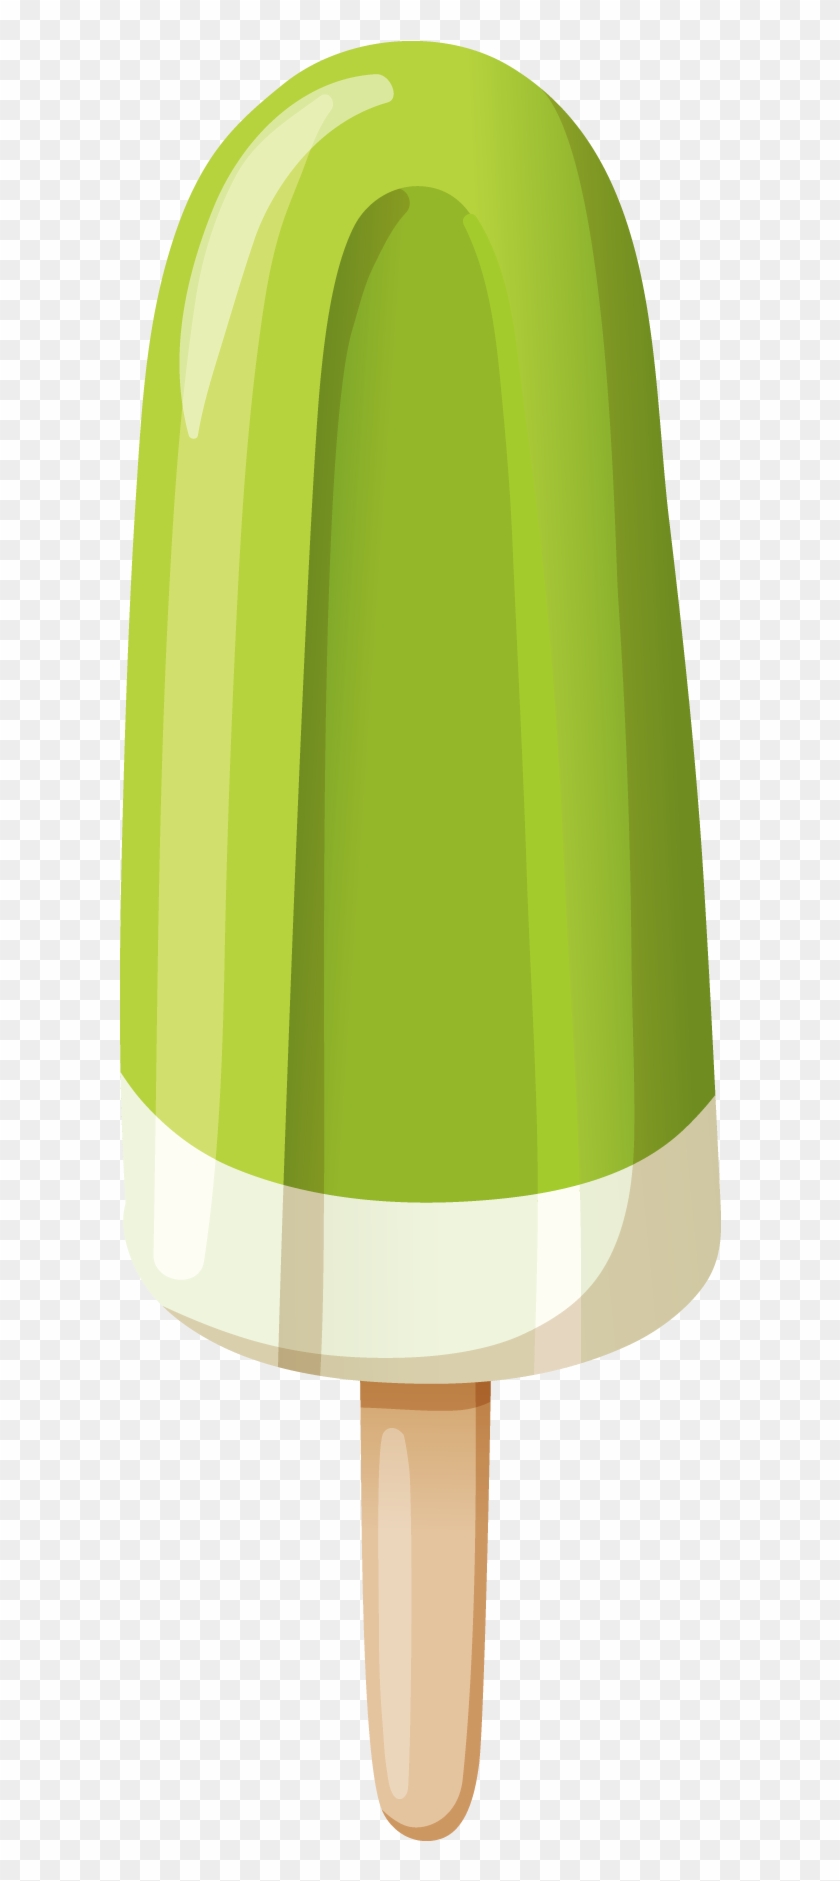 0147 15 0147 29 0147 - Ice Cream Popsicle Png #554659